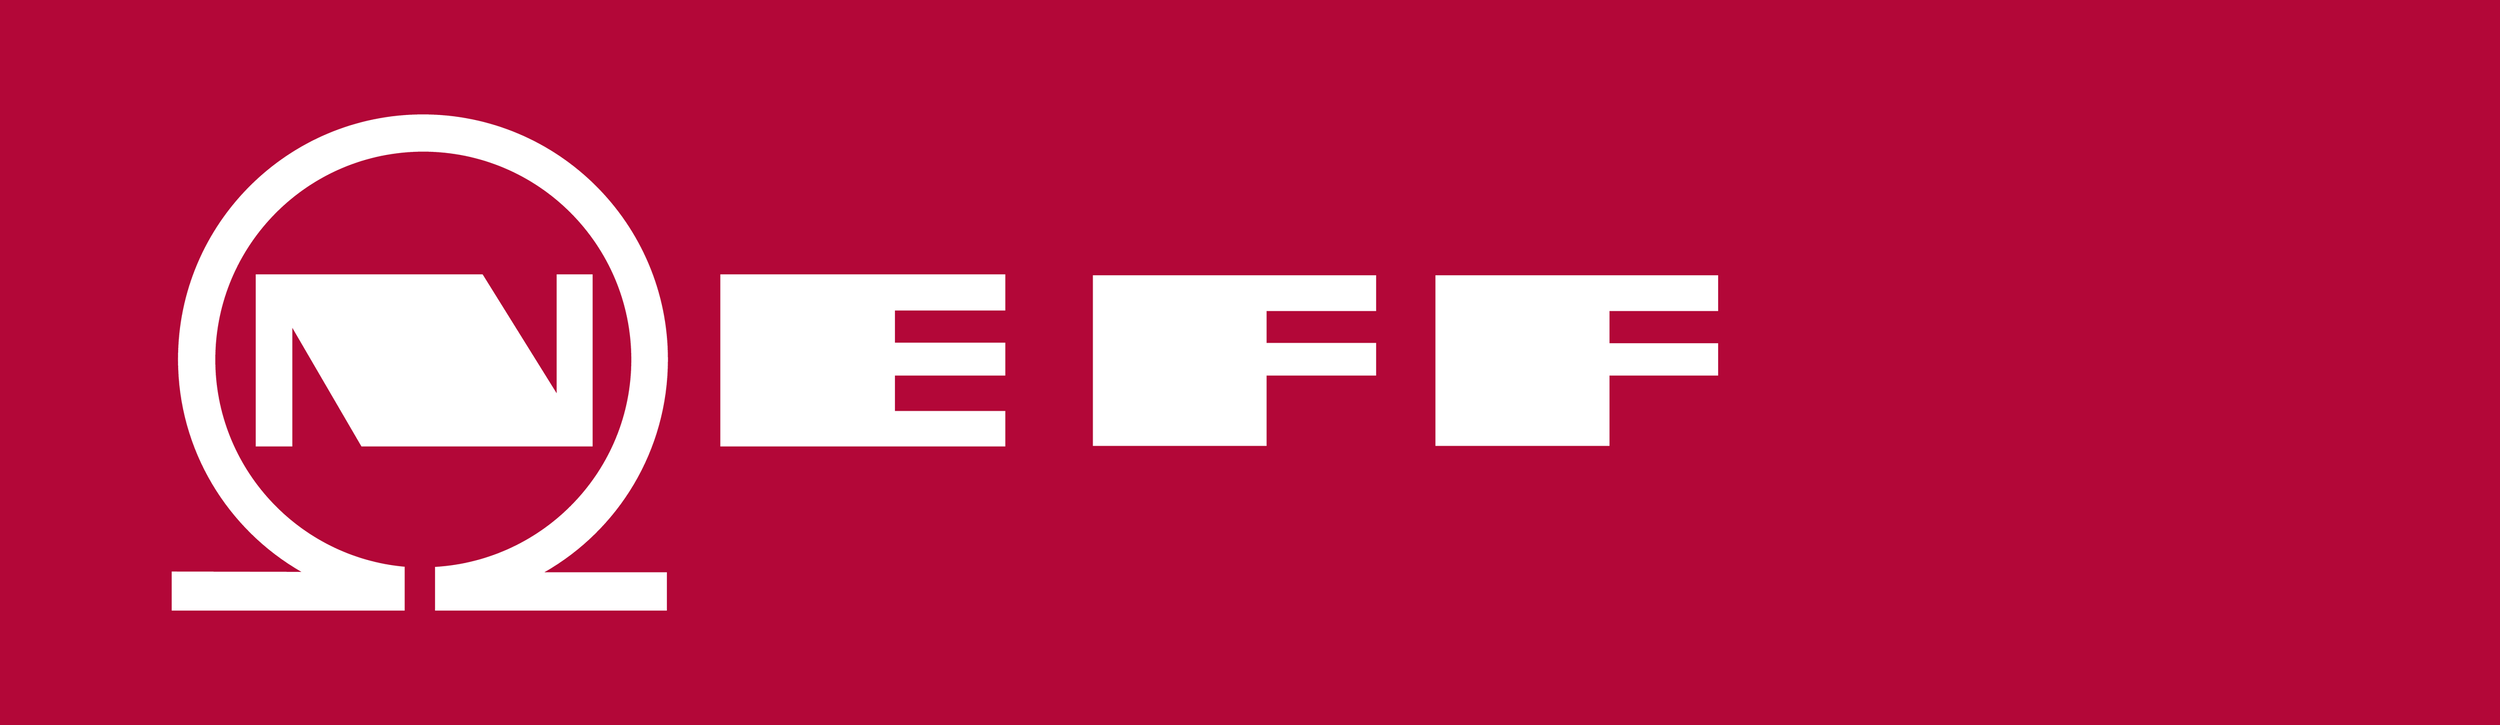 NEFF_Logo_4C_40mm-Image max 4000px, PNG.png